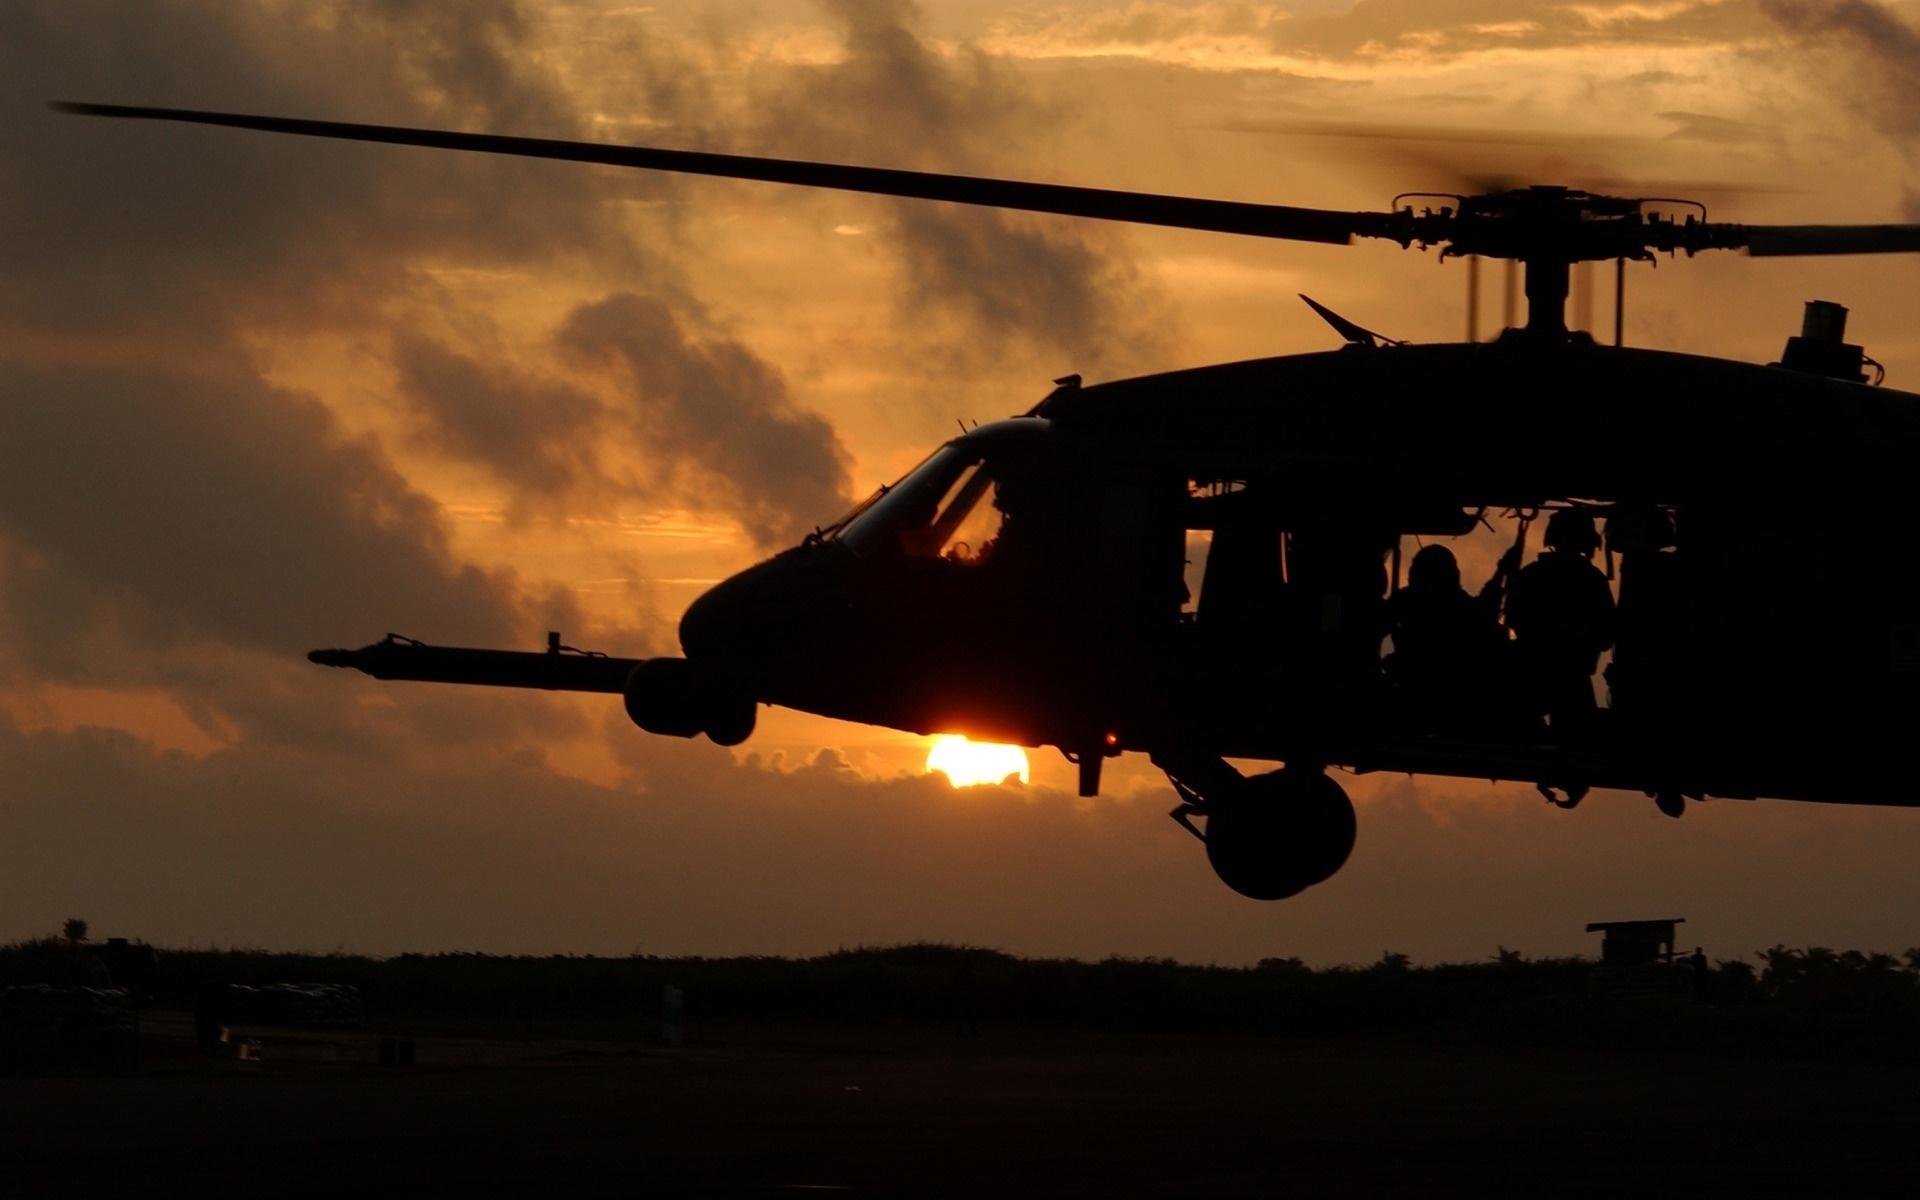 Wallpaper helicopter, evening, sunset, Lungi, Sierra Leone, Sikorsky